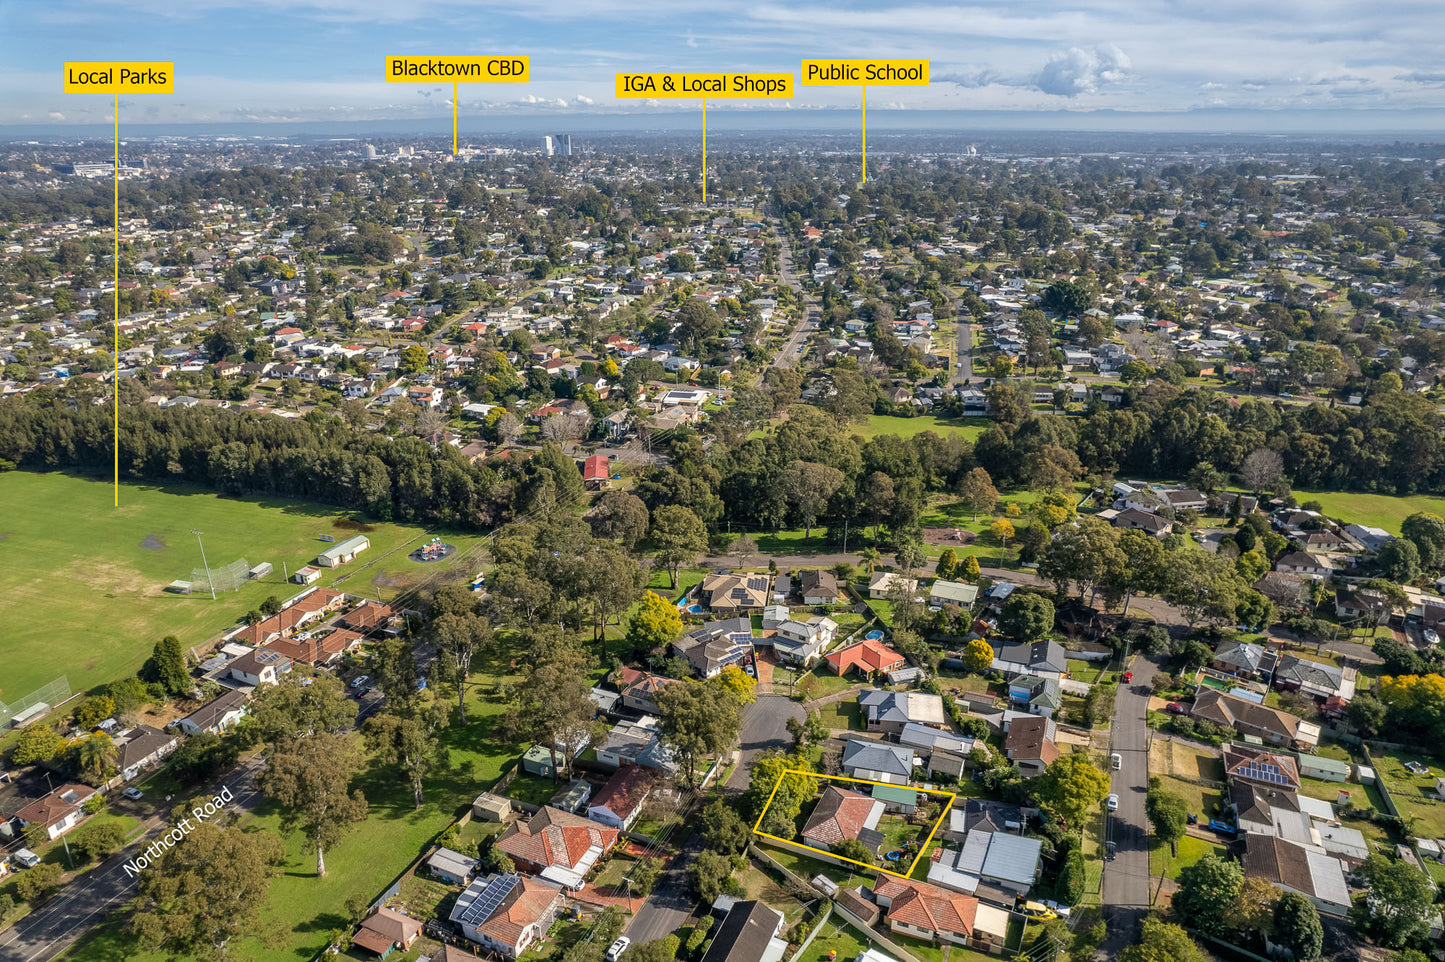 5 Koorool Avenue, Lalor Park, NSW 2147 - SOLD WITH ANOTHER OUTSTANDING RESULT